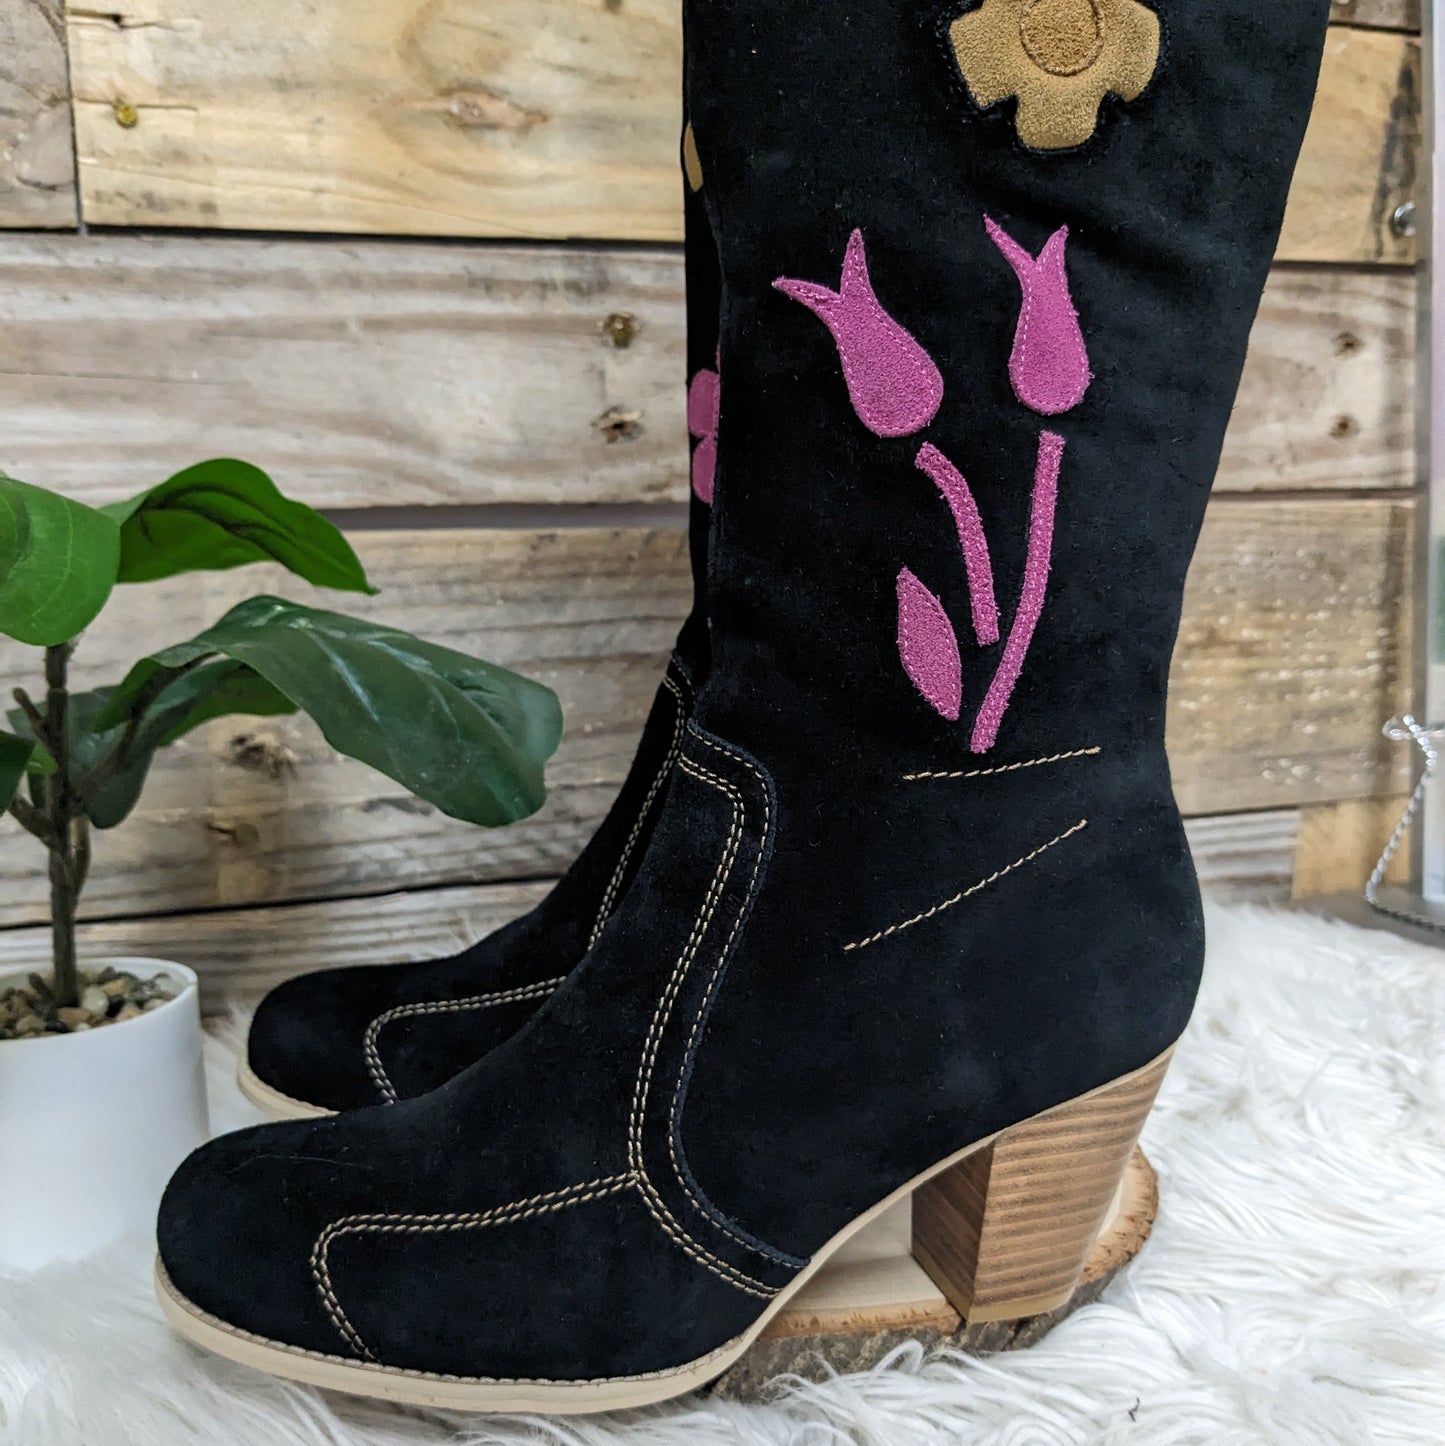 Who's That Girl Cut Out Boots Sz EU38